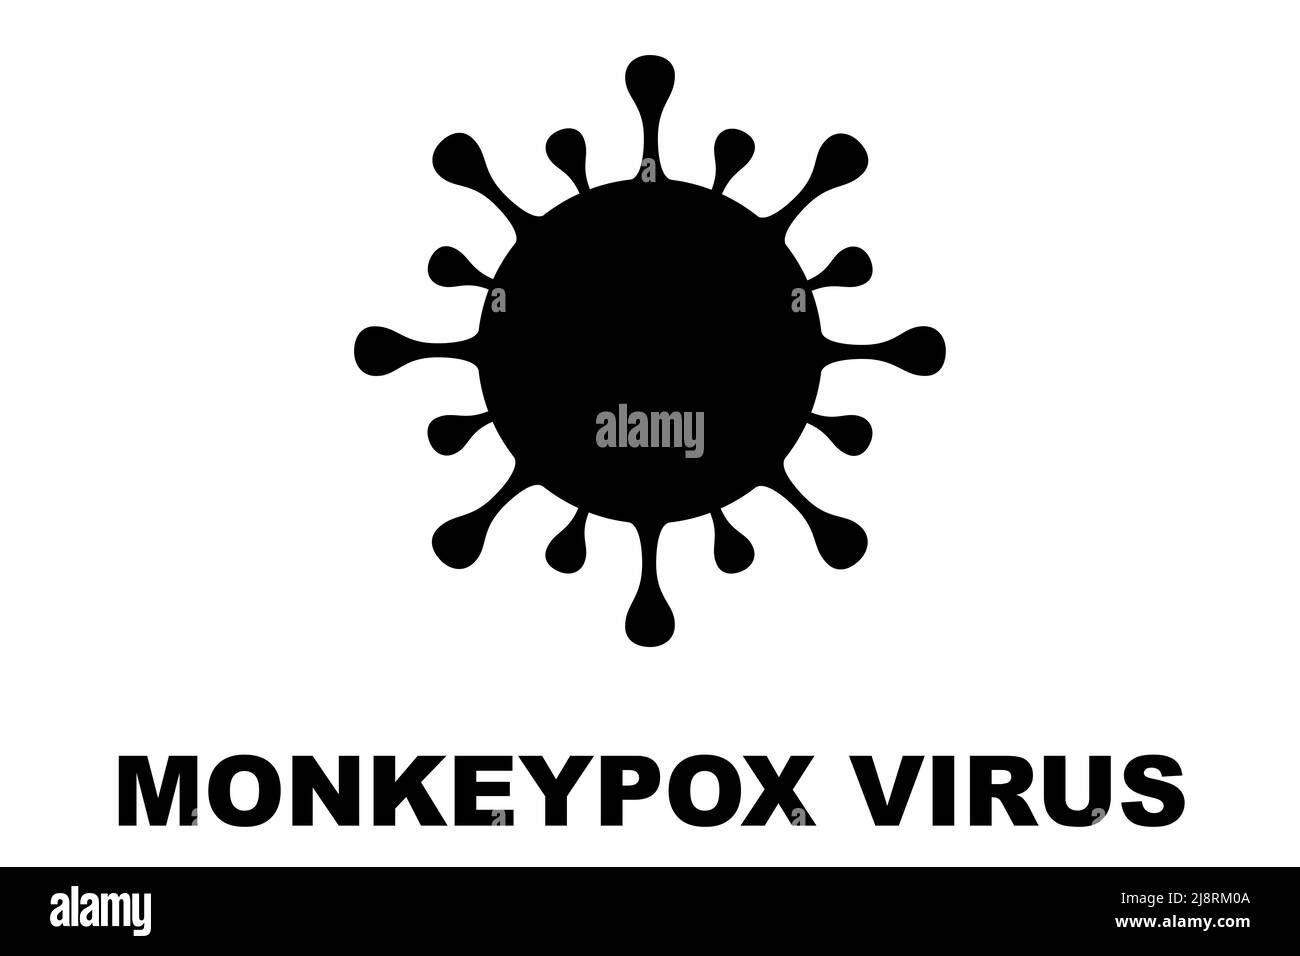 MONKEYPOX VIRUS. Monkeypox is a zoonotic viral disease that can infect nonhuman primates, rodents, and some other mammals. Virus design with text. Stock Photo